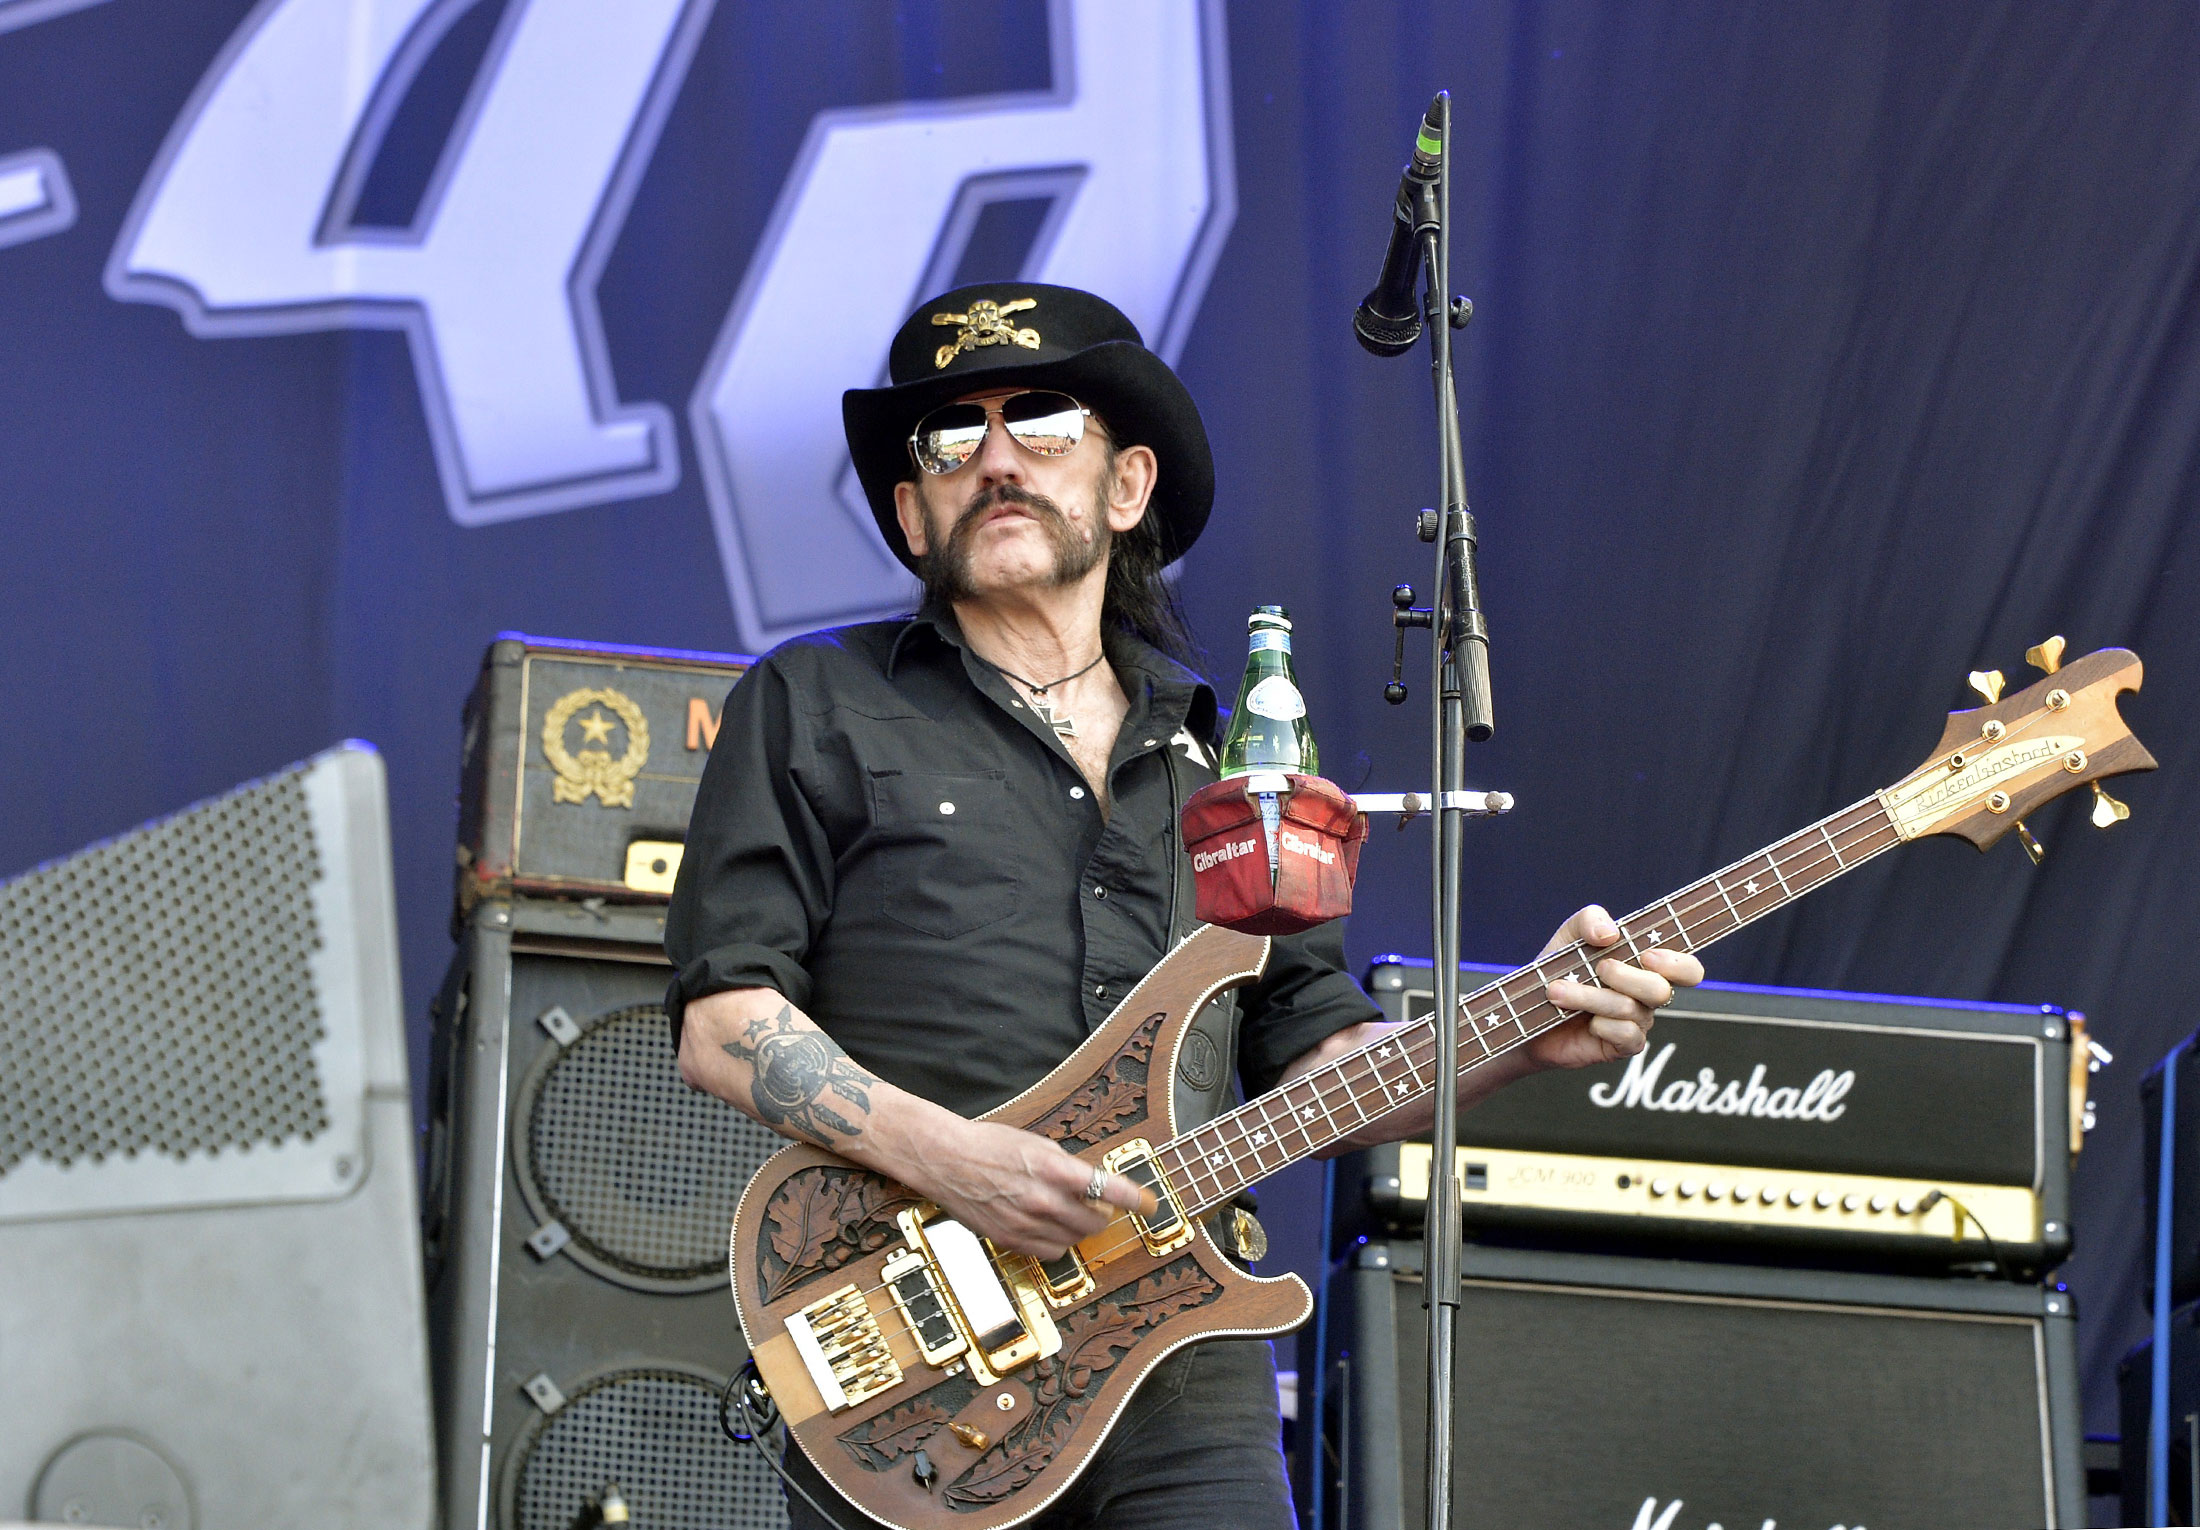 The Motörhead song that Lemmy had enough of